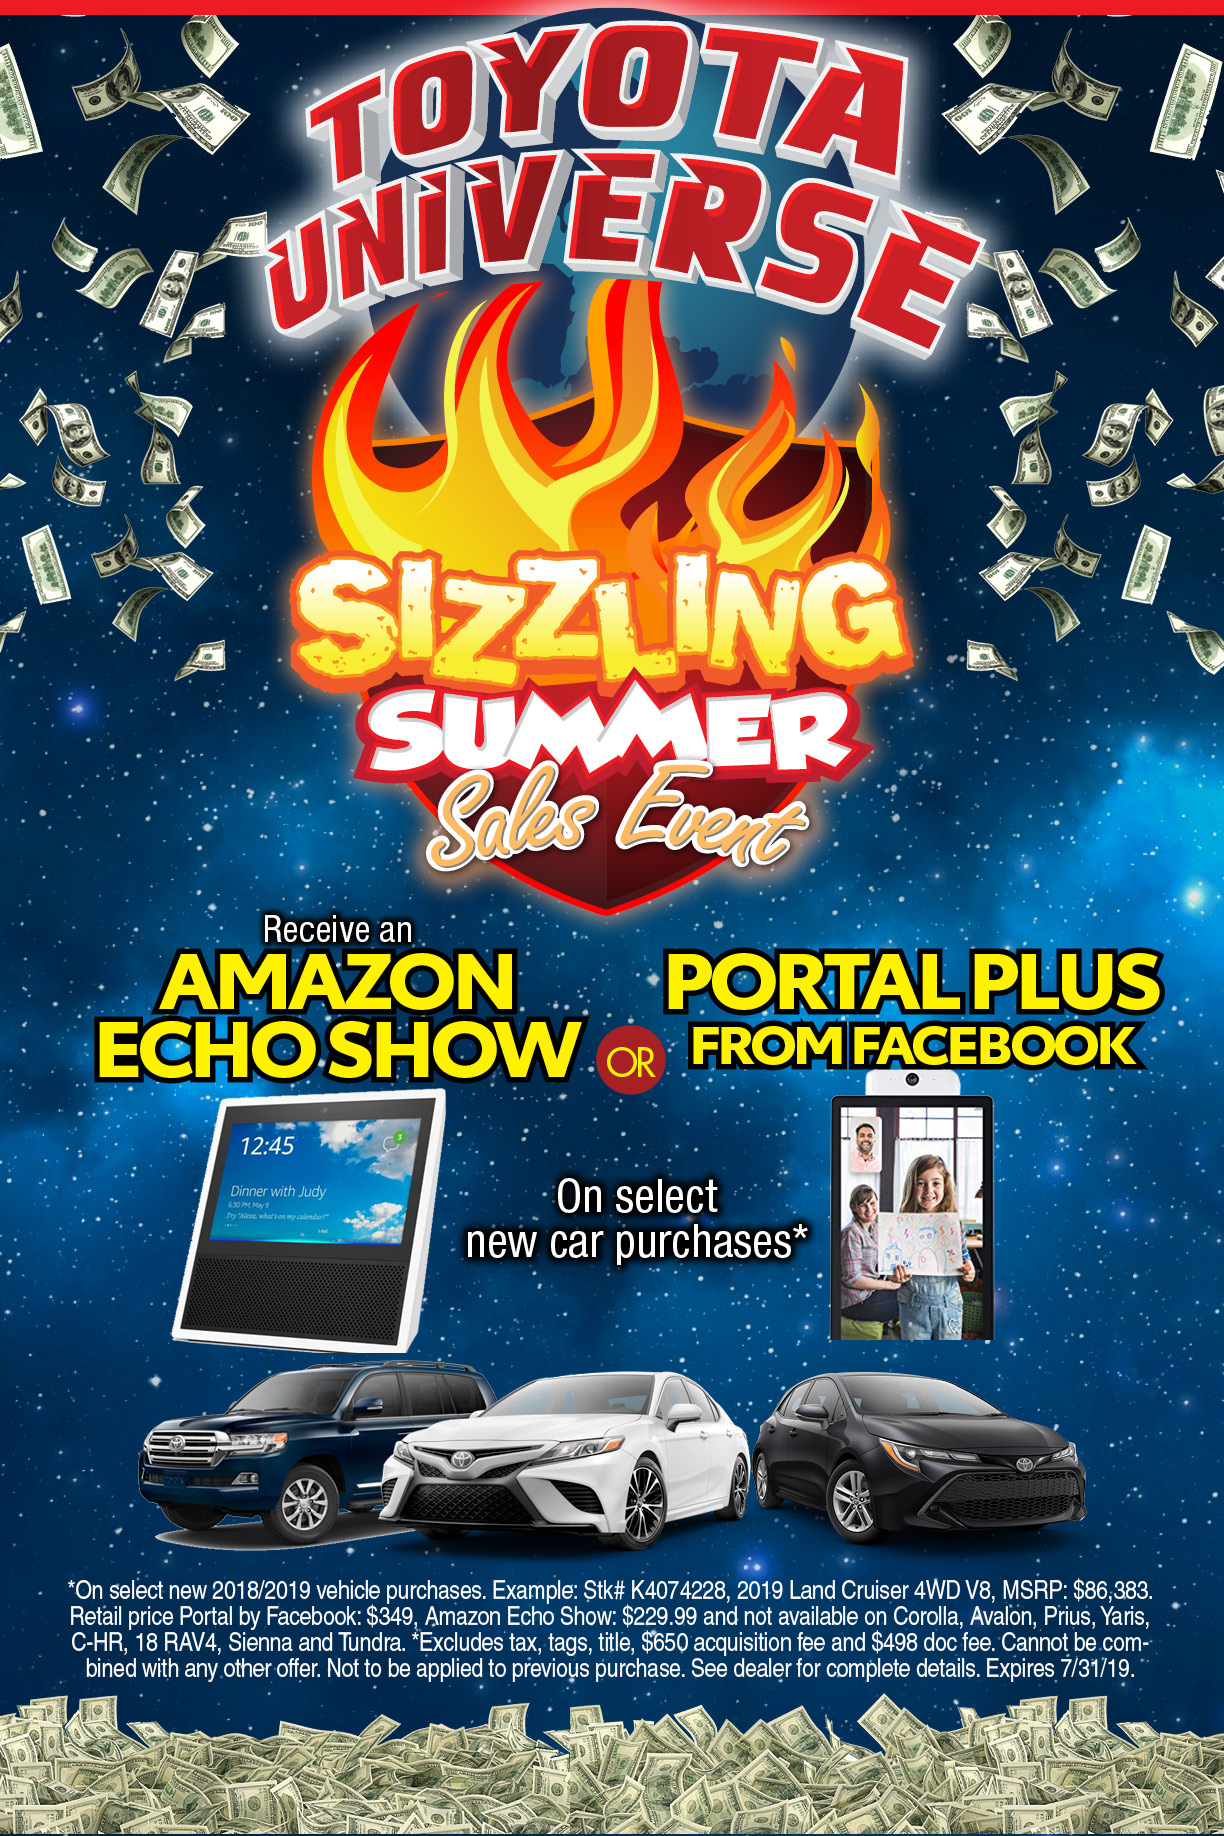 Sizzling Summer Sales Event Toyota Universe